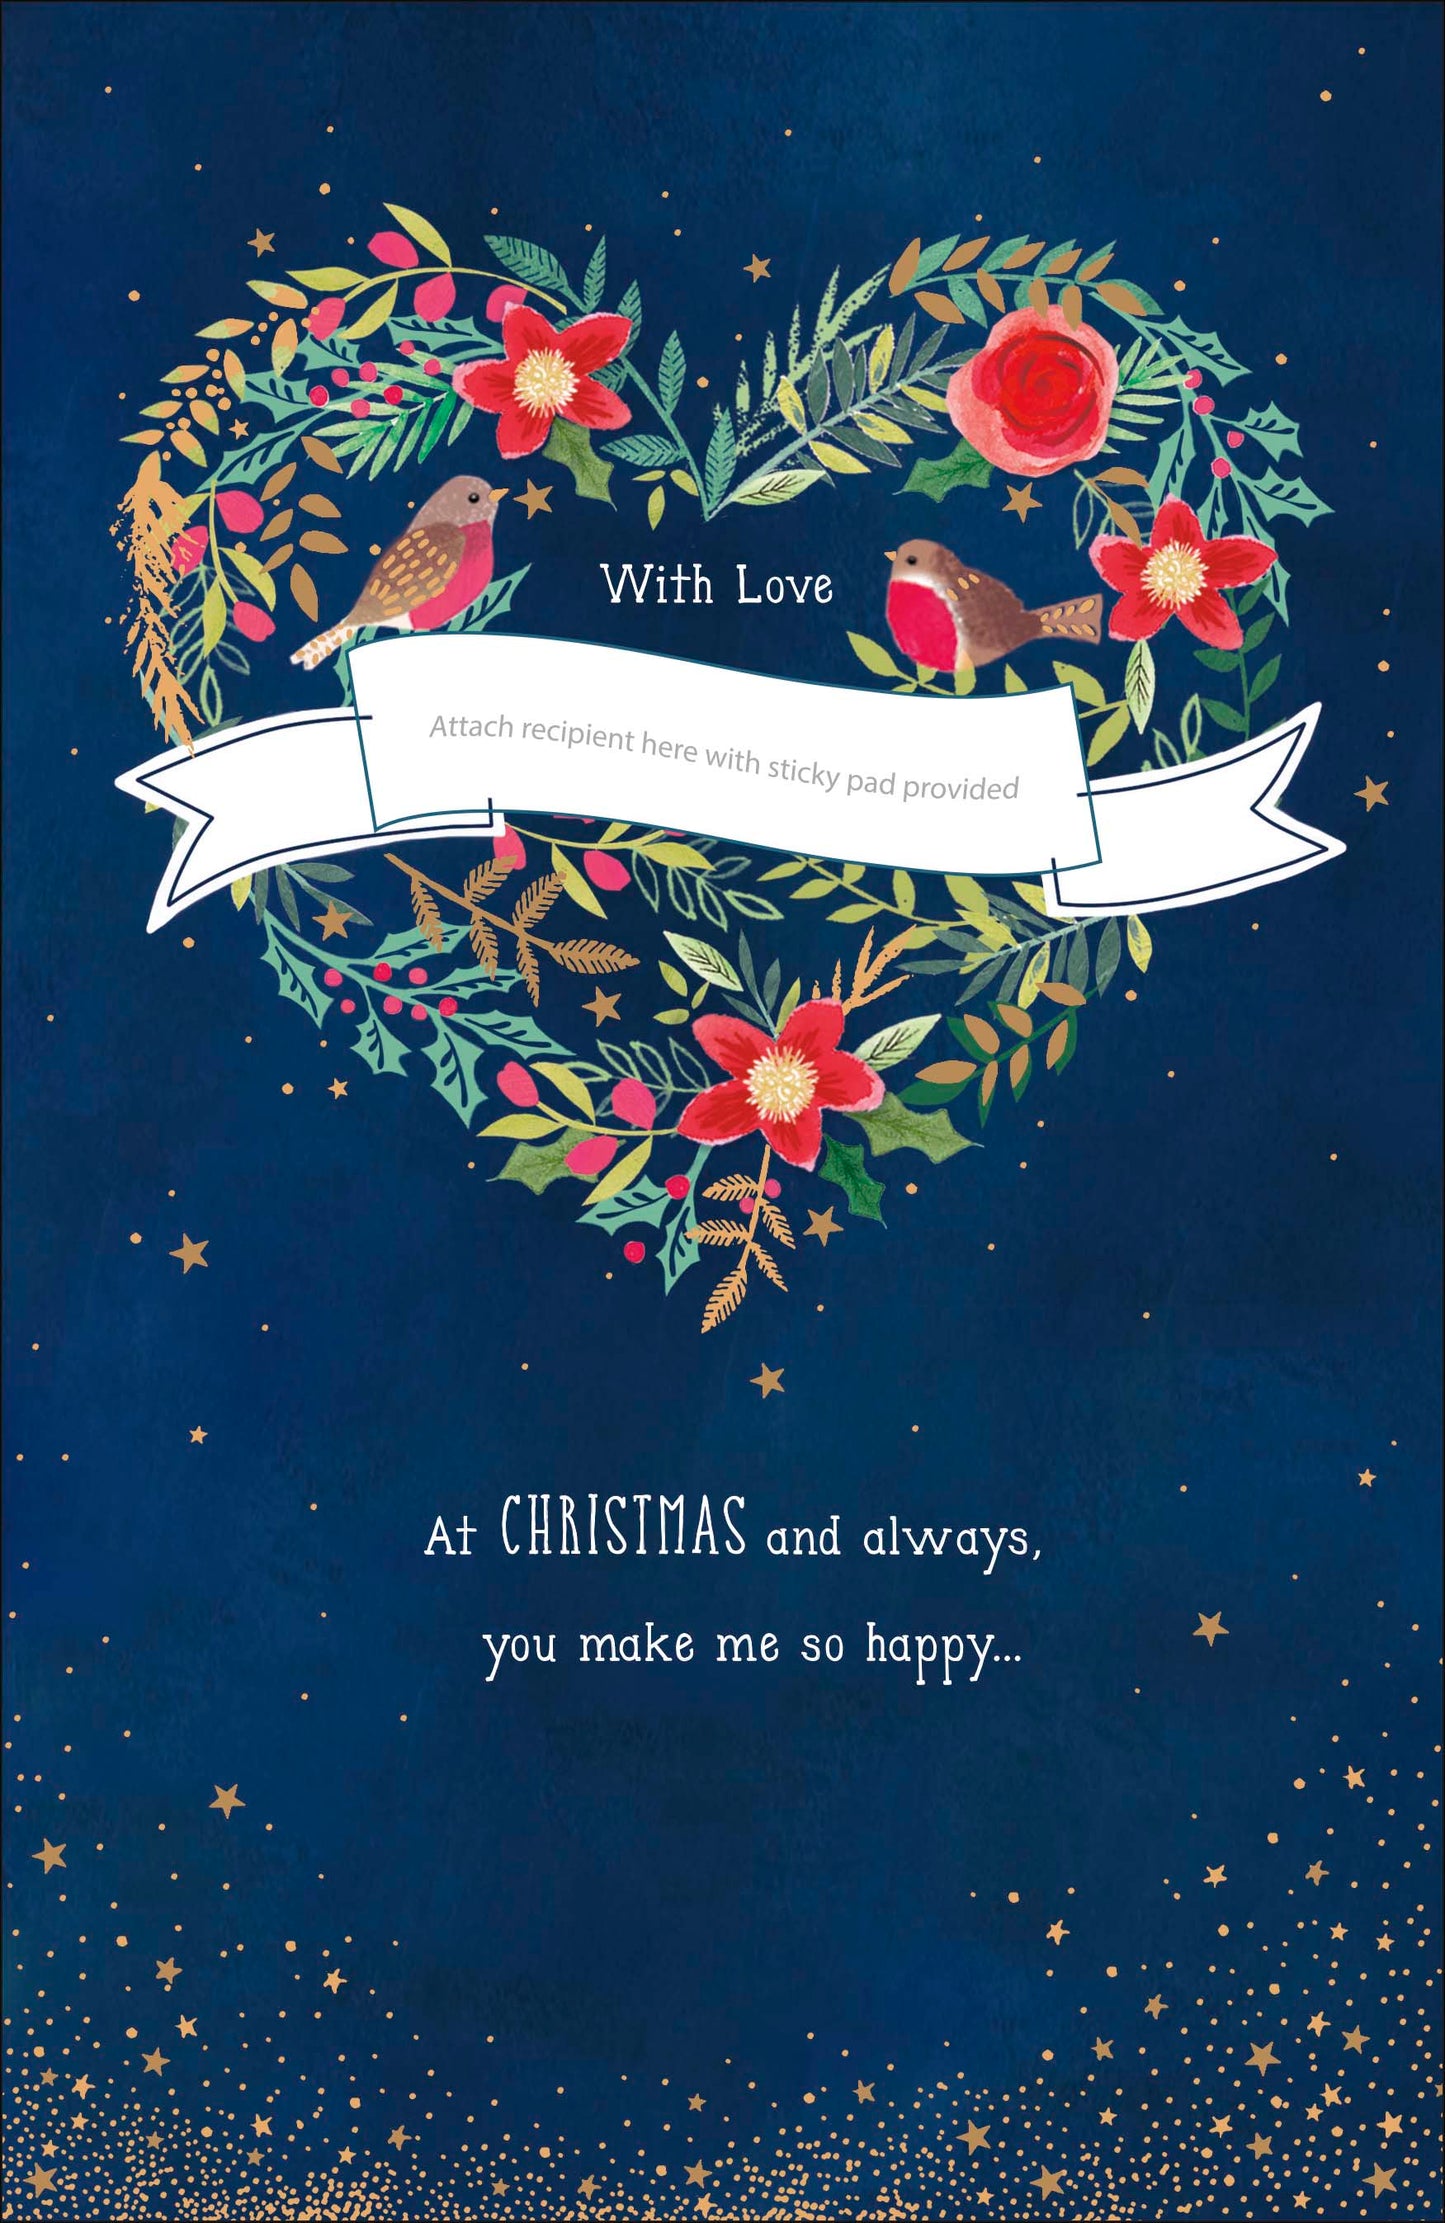 With Love ... Multi Caption Christmas Greeting Card With Stick On Captions